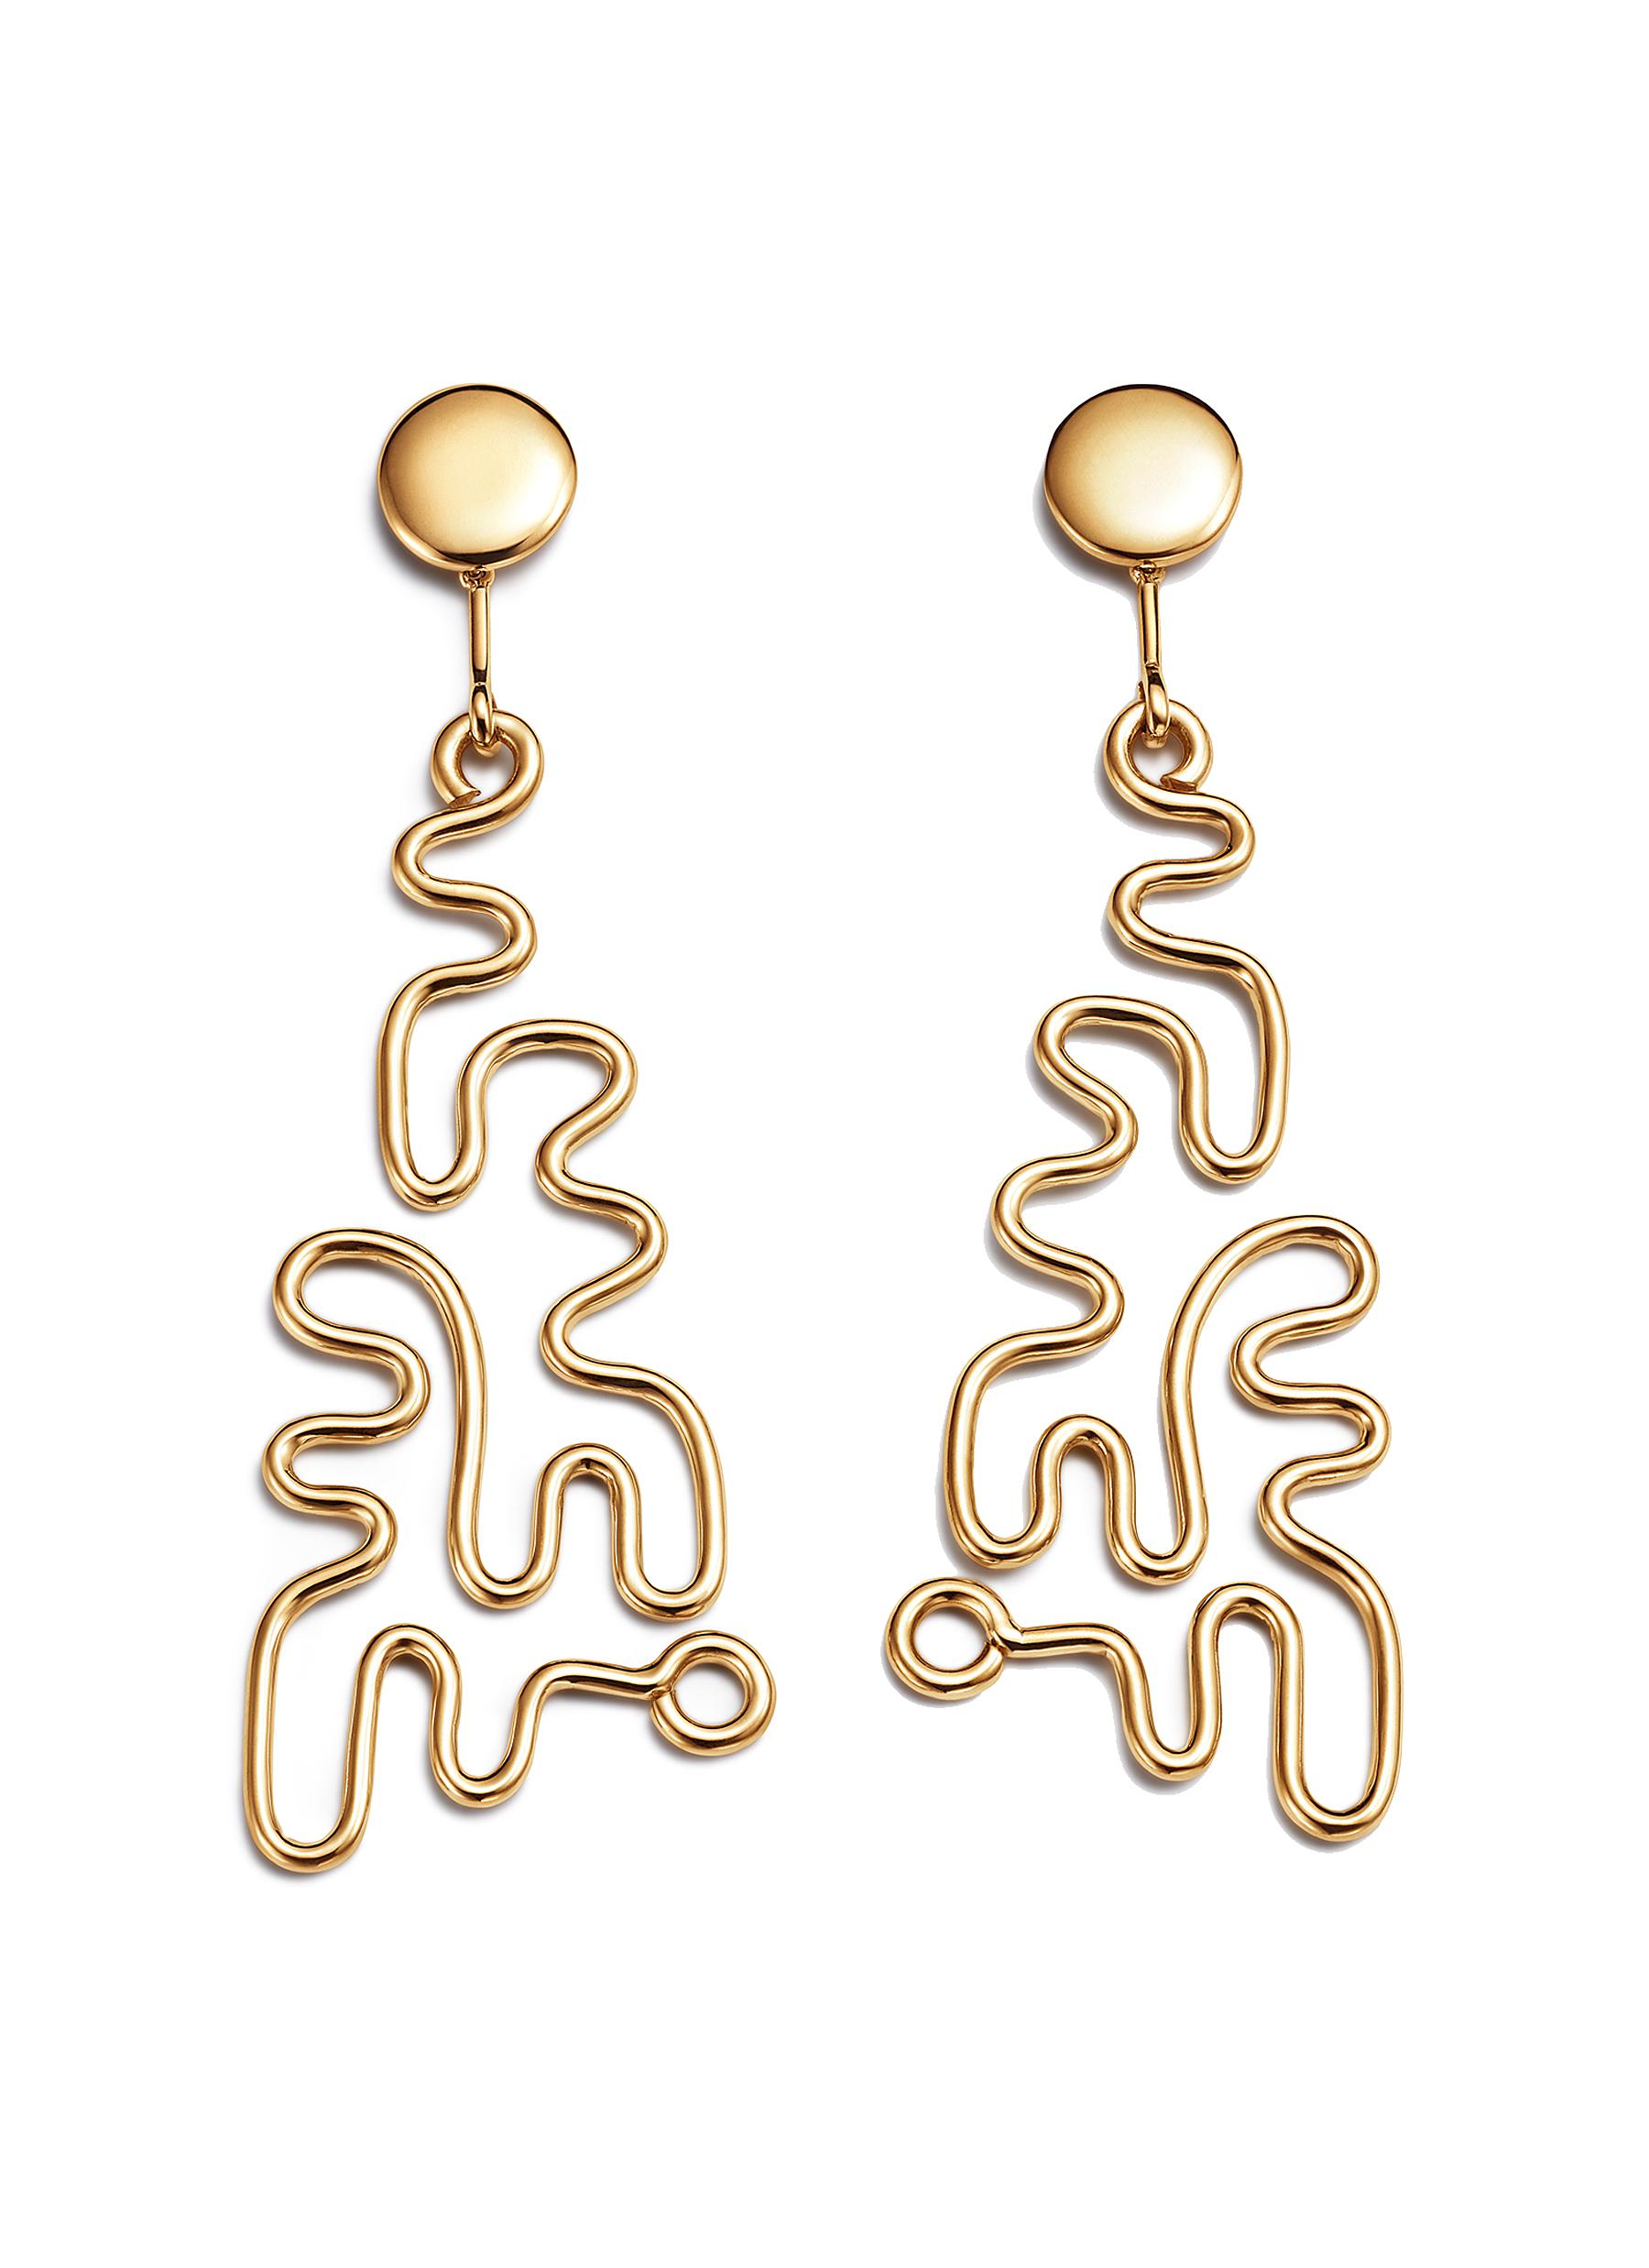 FUTURA ‘Legends' 18k fairmined ecological gold puzzle earrings